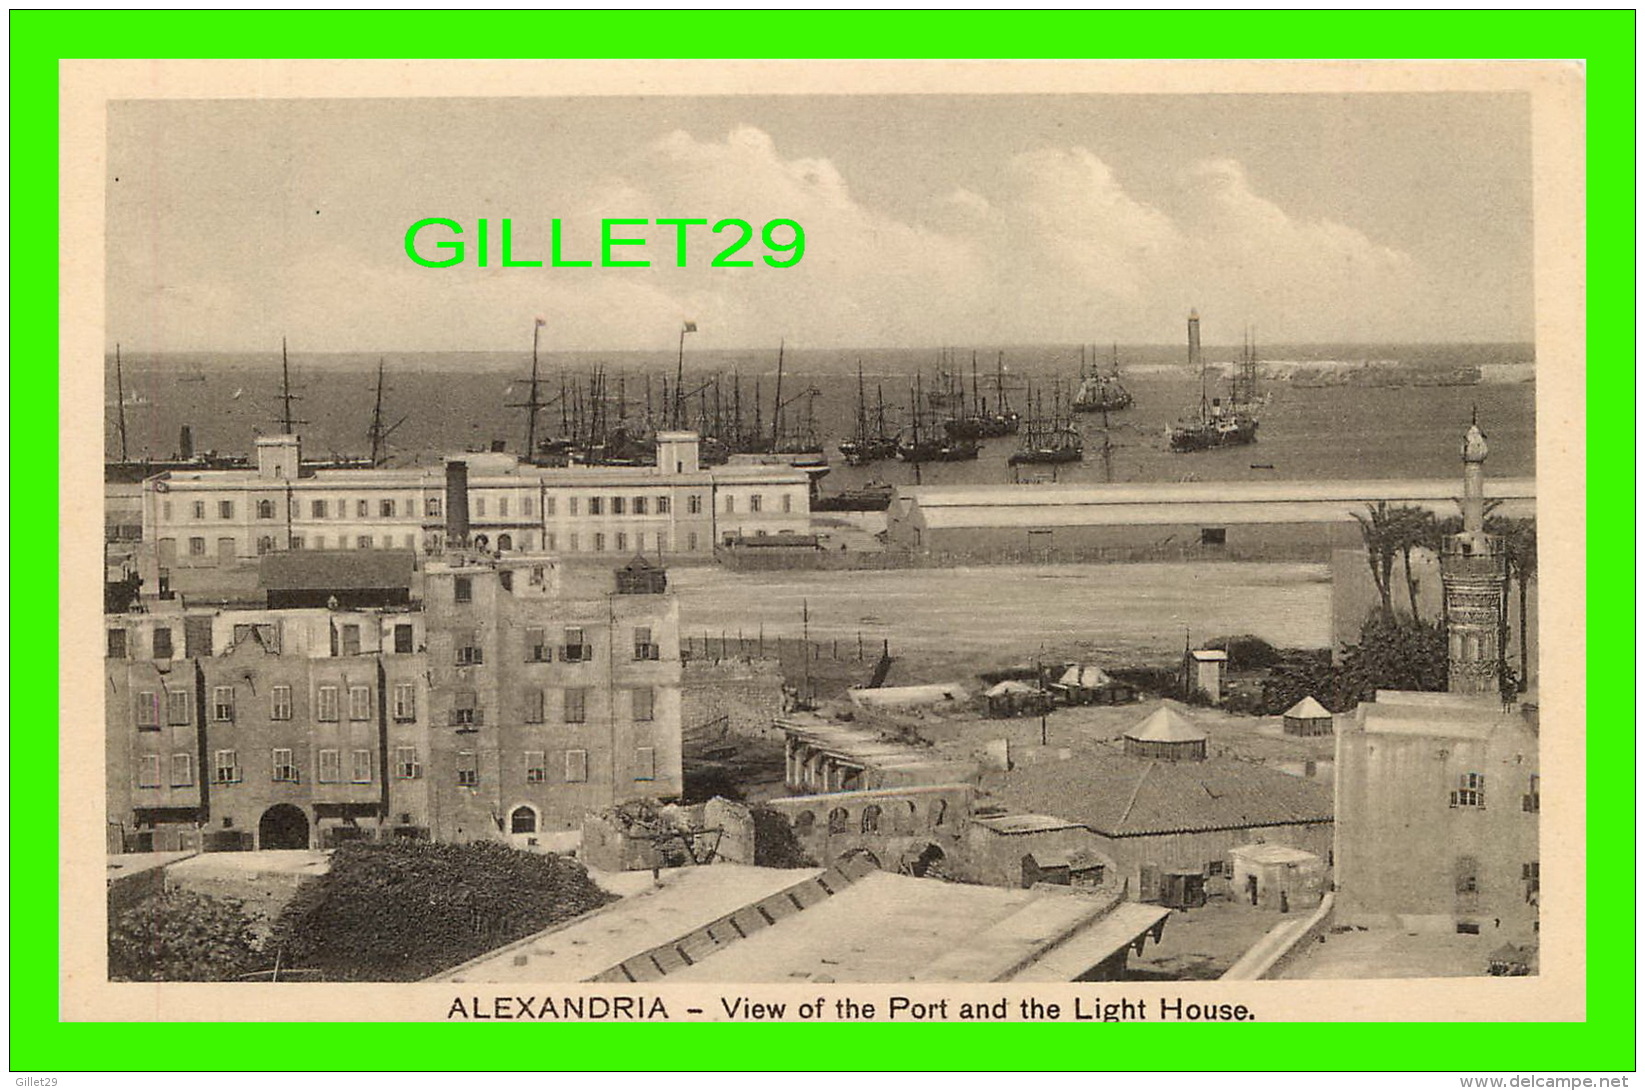 ALEXANDRIA, EGYPTE - VIEW OF THE PORT AND THE LIGHT HOUSE  - THE CAIRO POSTCARD TRUST - - Alexandrie